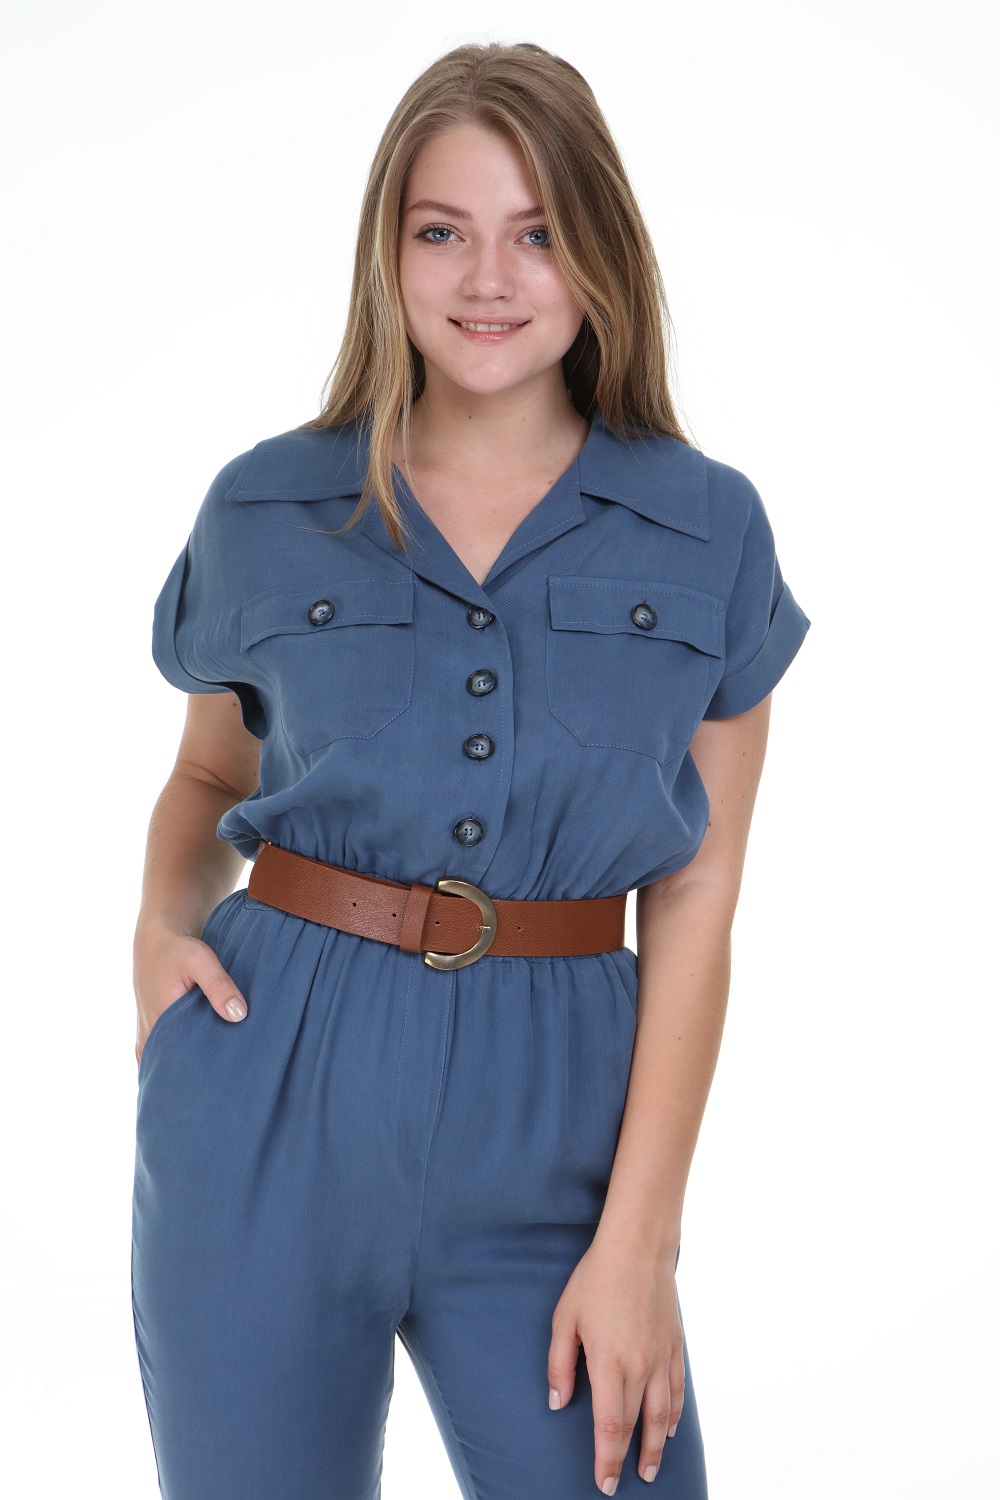 Blue Color Jumpsuit with Short Sleeve Buttons